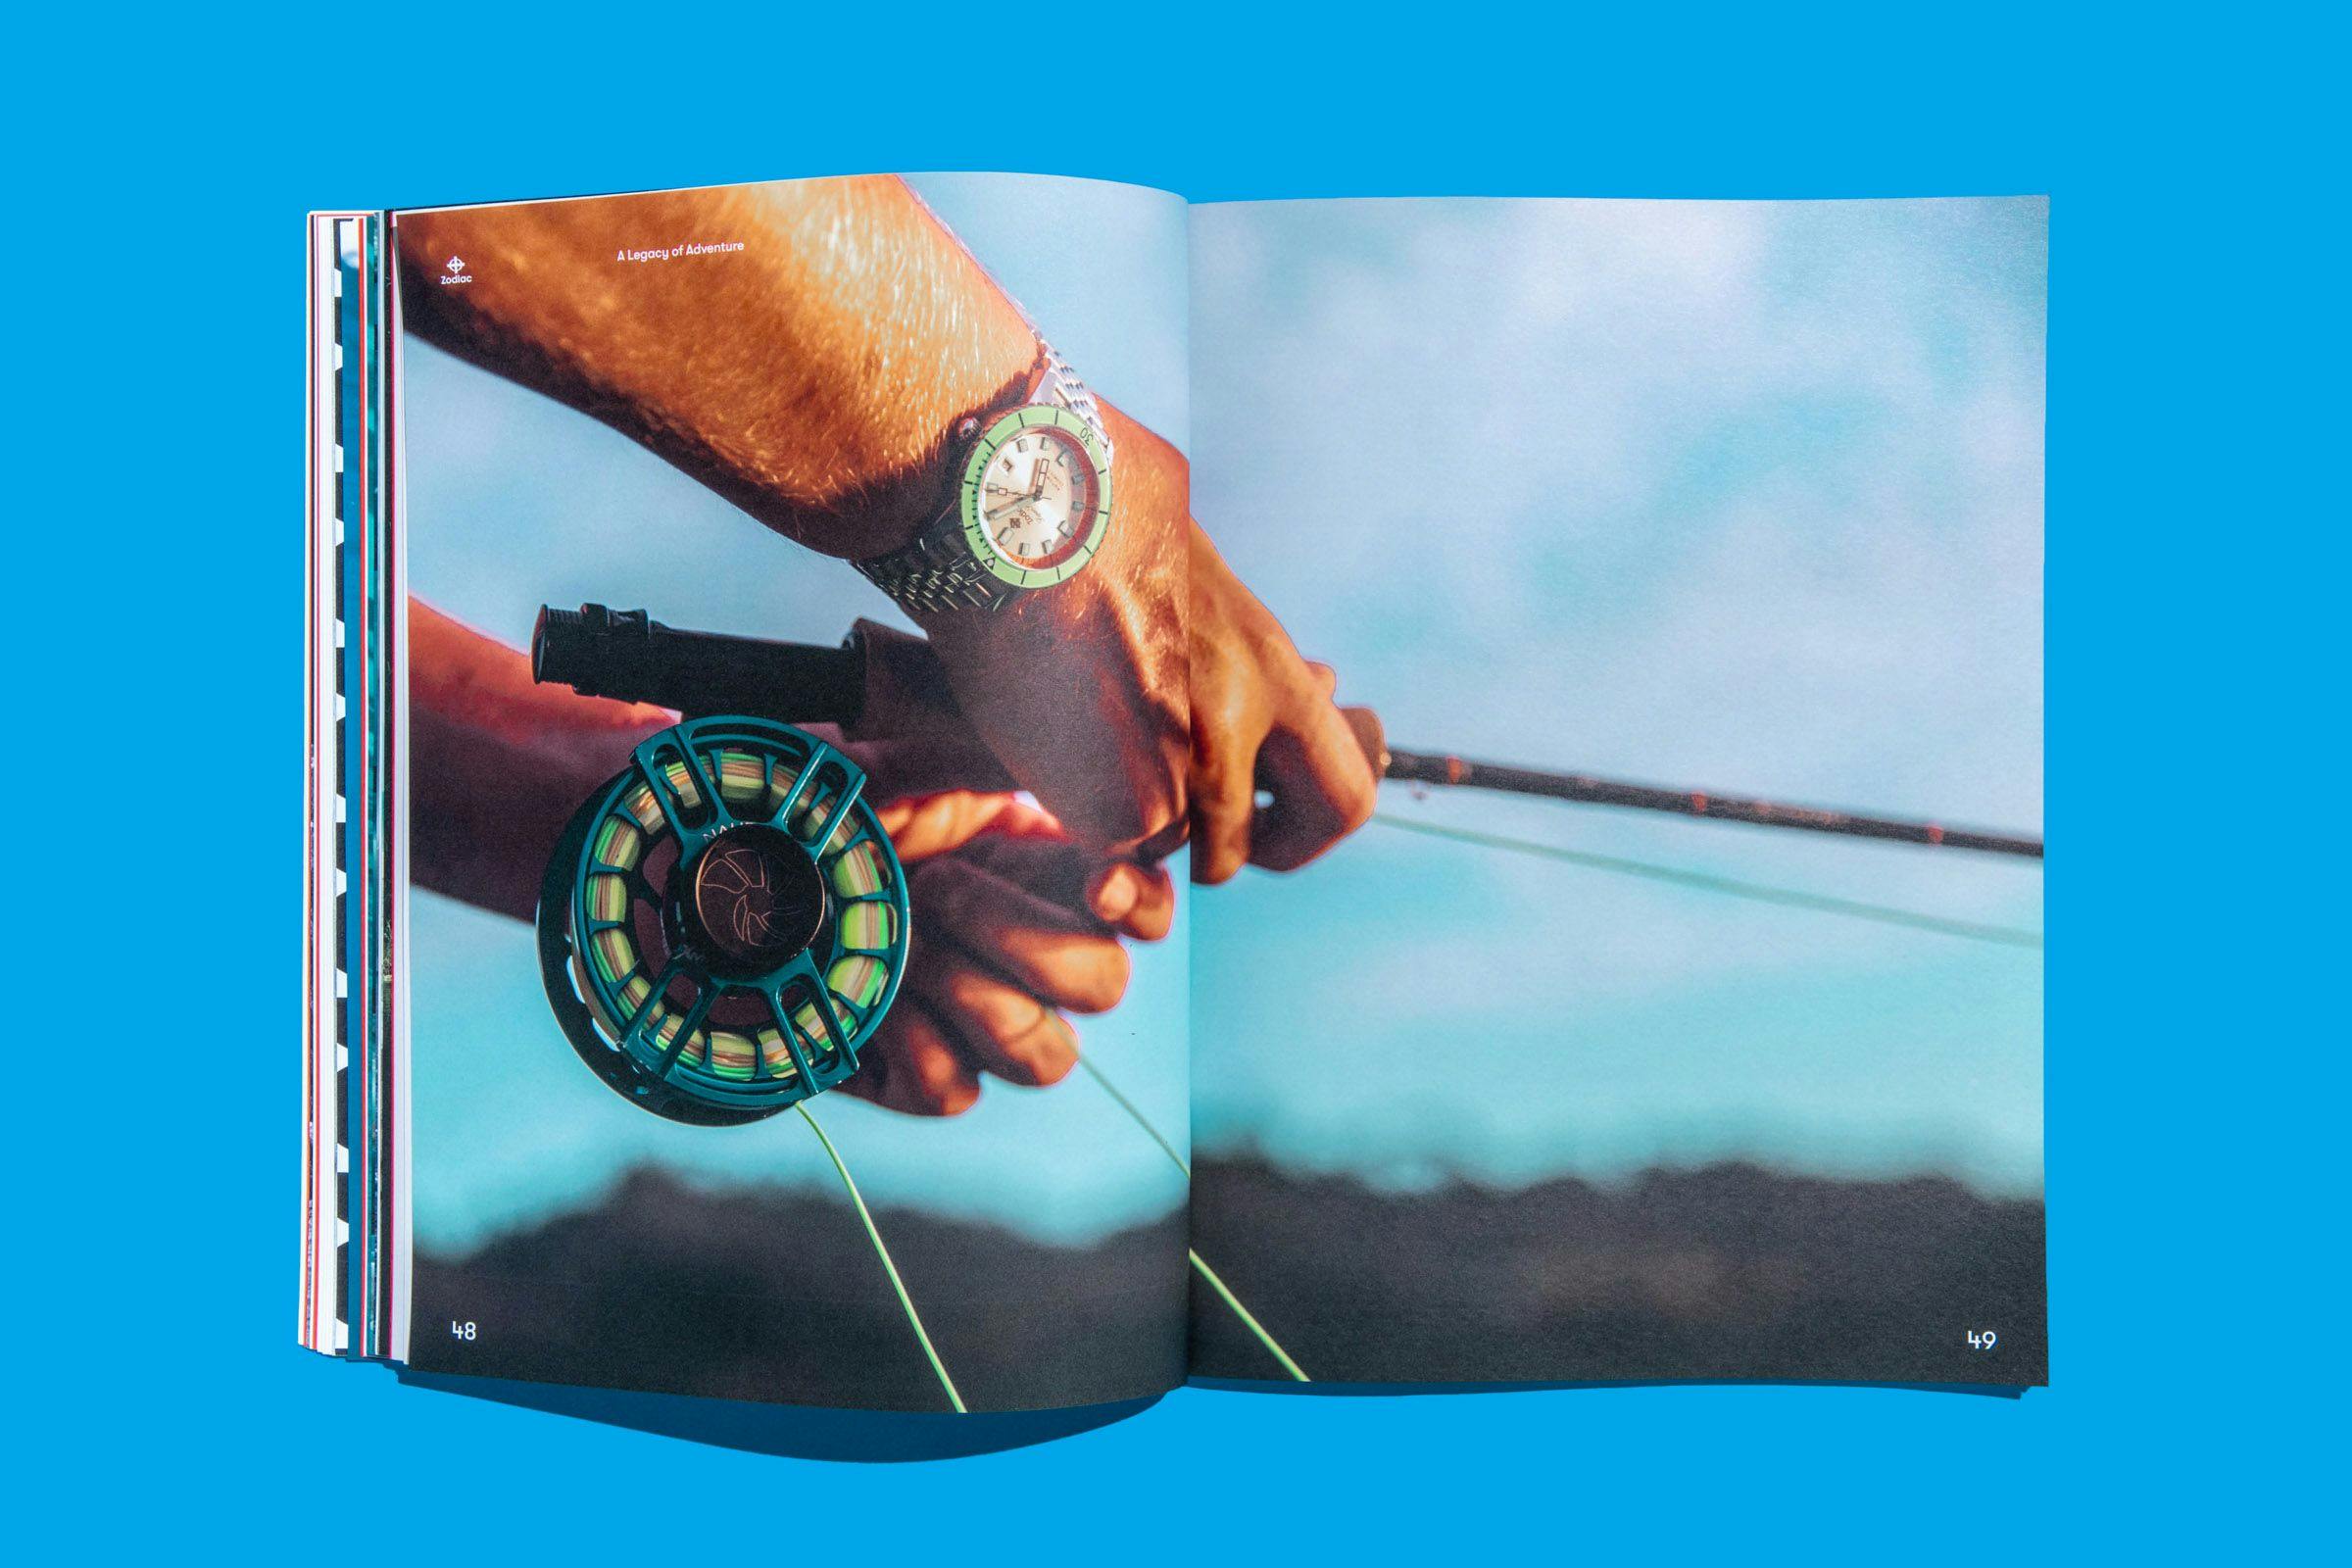 A two-page spread showing a photo of someone fishing with a Zodiac Watch on